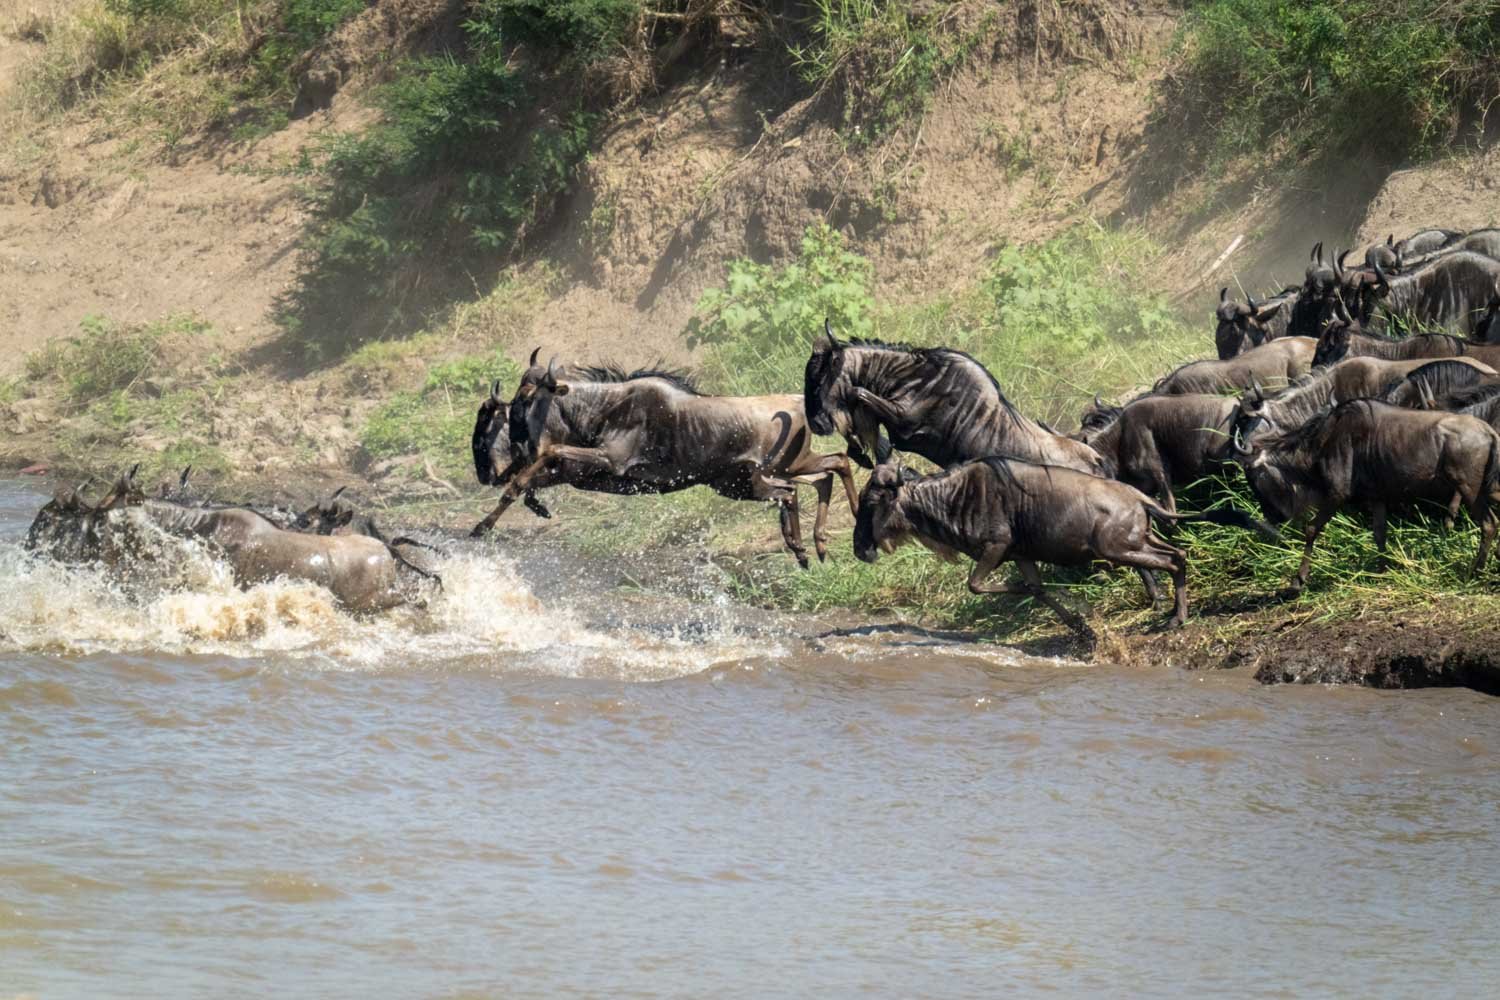 Blue wildebeest jump into river from bank